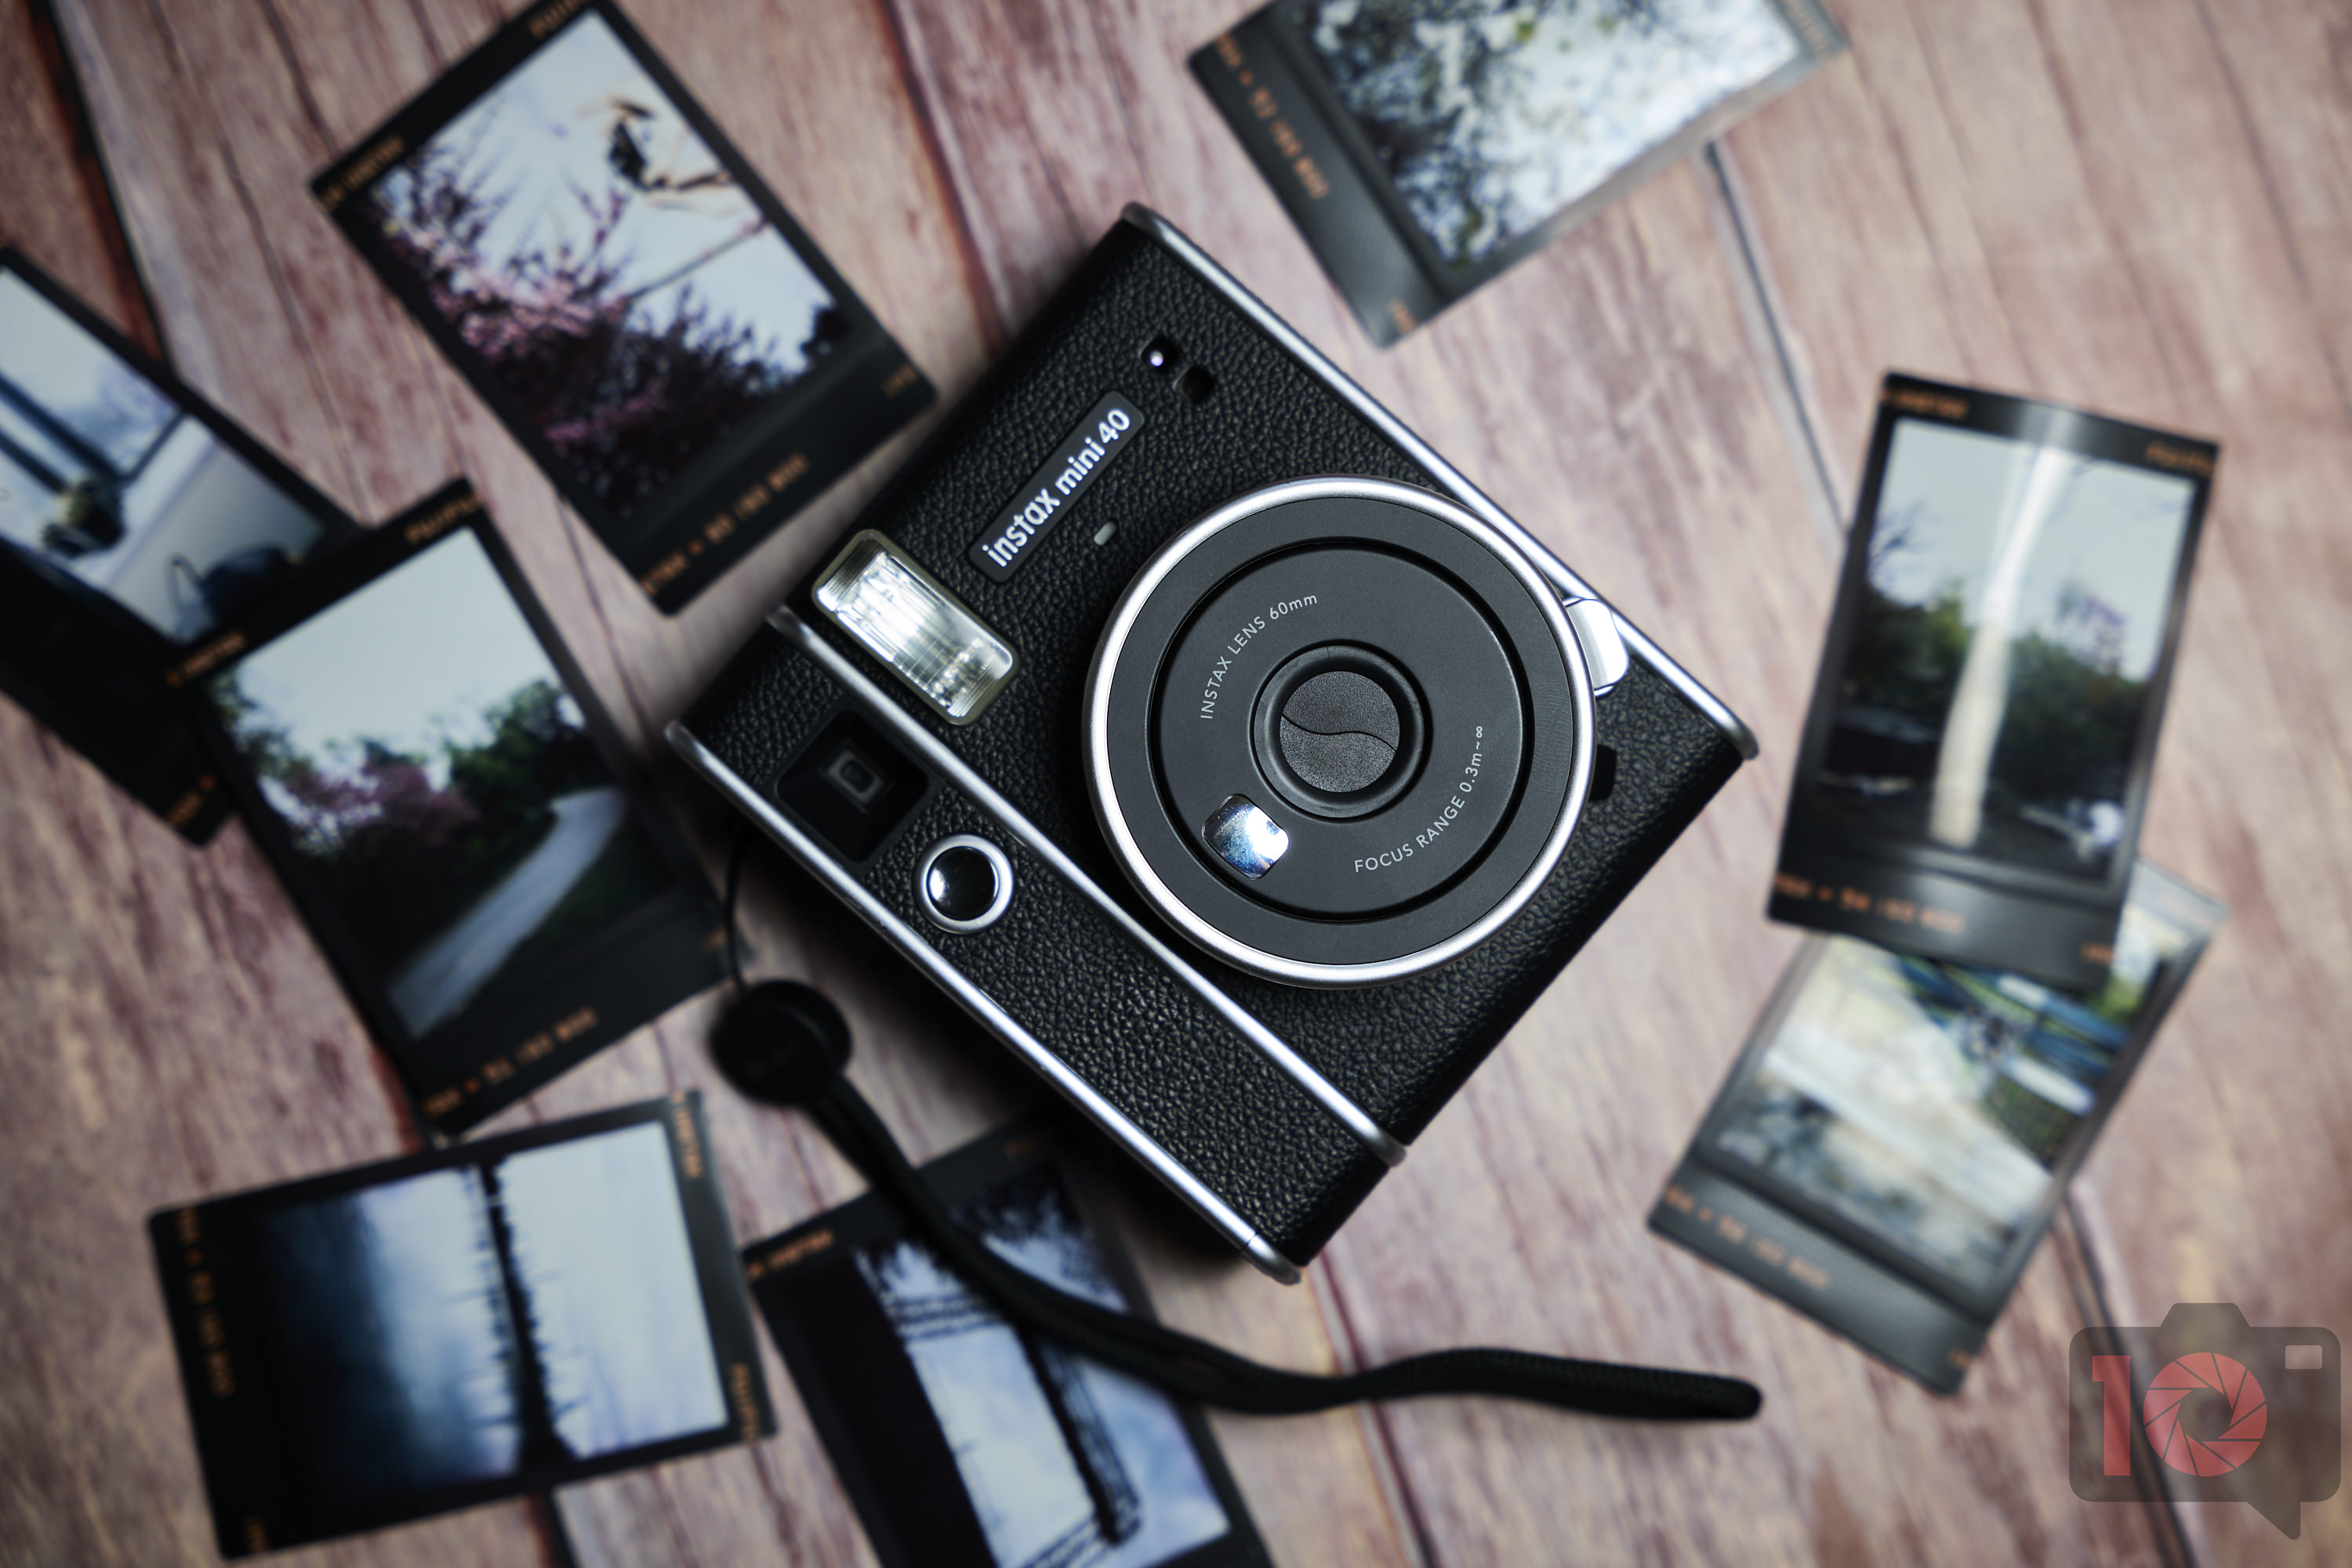 https://www.thephoblographer.com/wp-content/uploads/2021/05/Chris-Gampat-The-Phoblographer-Fujifilm-Instax-Mini-40-review-product-images-2.81-100s200-11.jpg